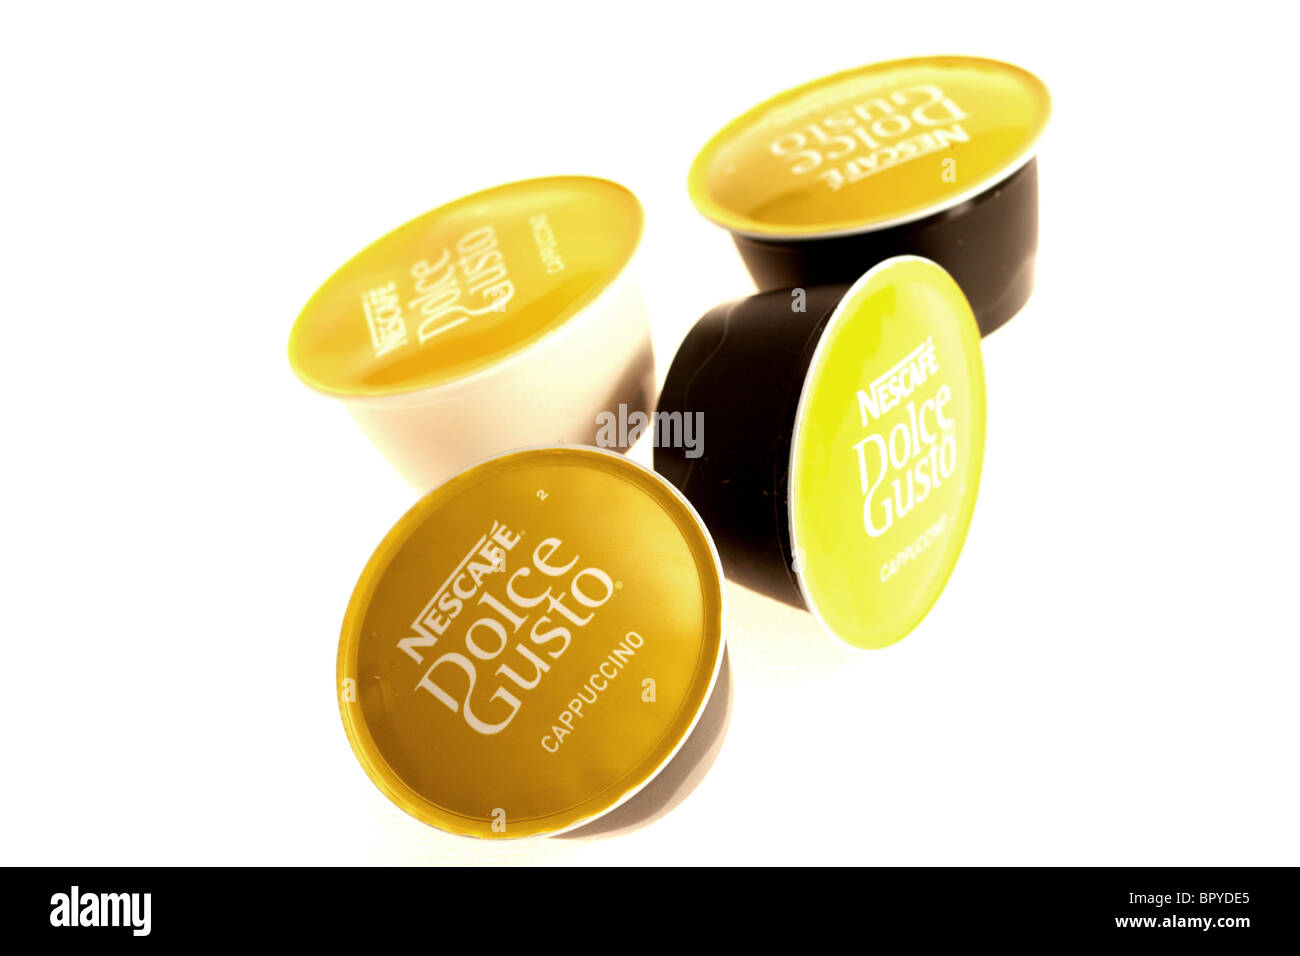 Nescafe Dolce Gusto High Resolution Stock Photography and Images - Alamy